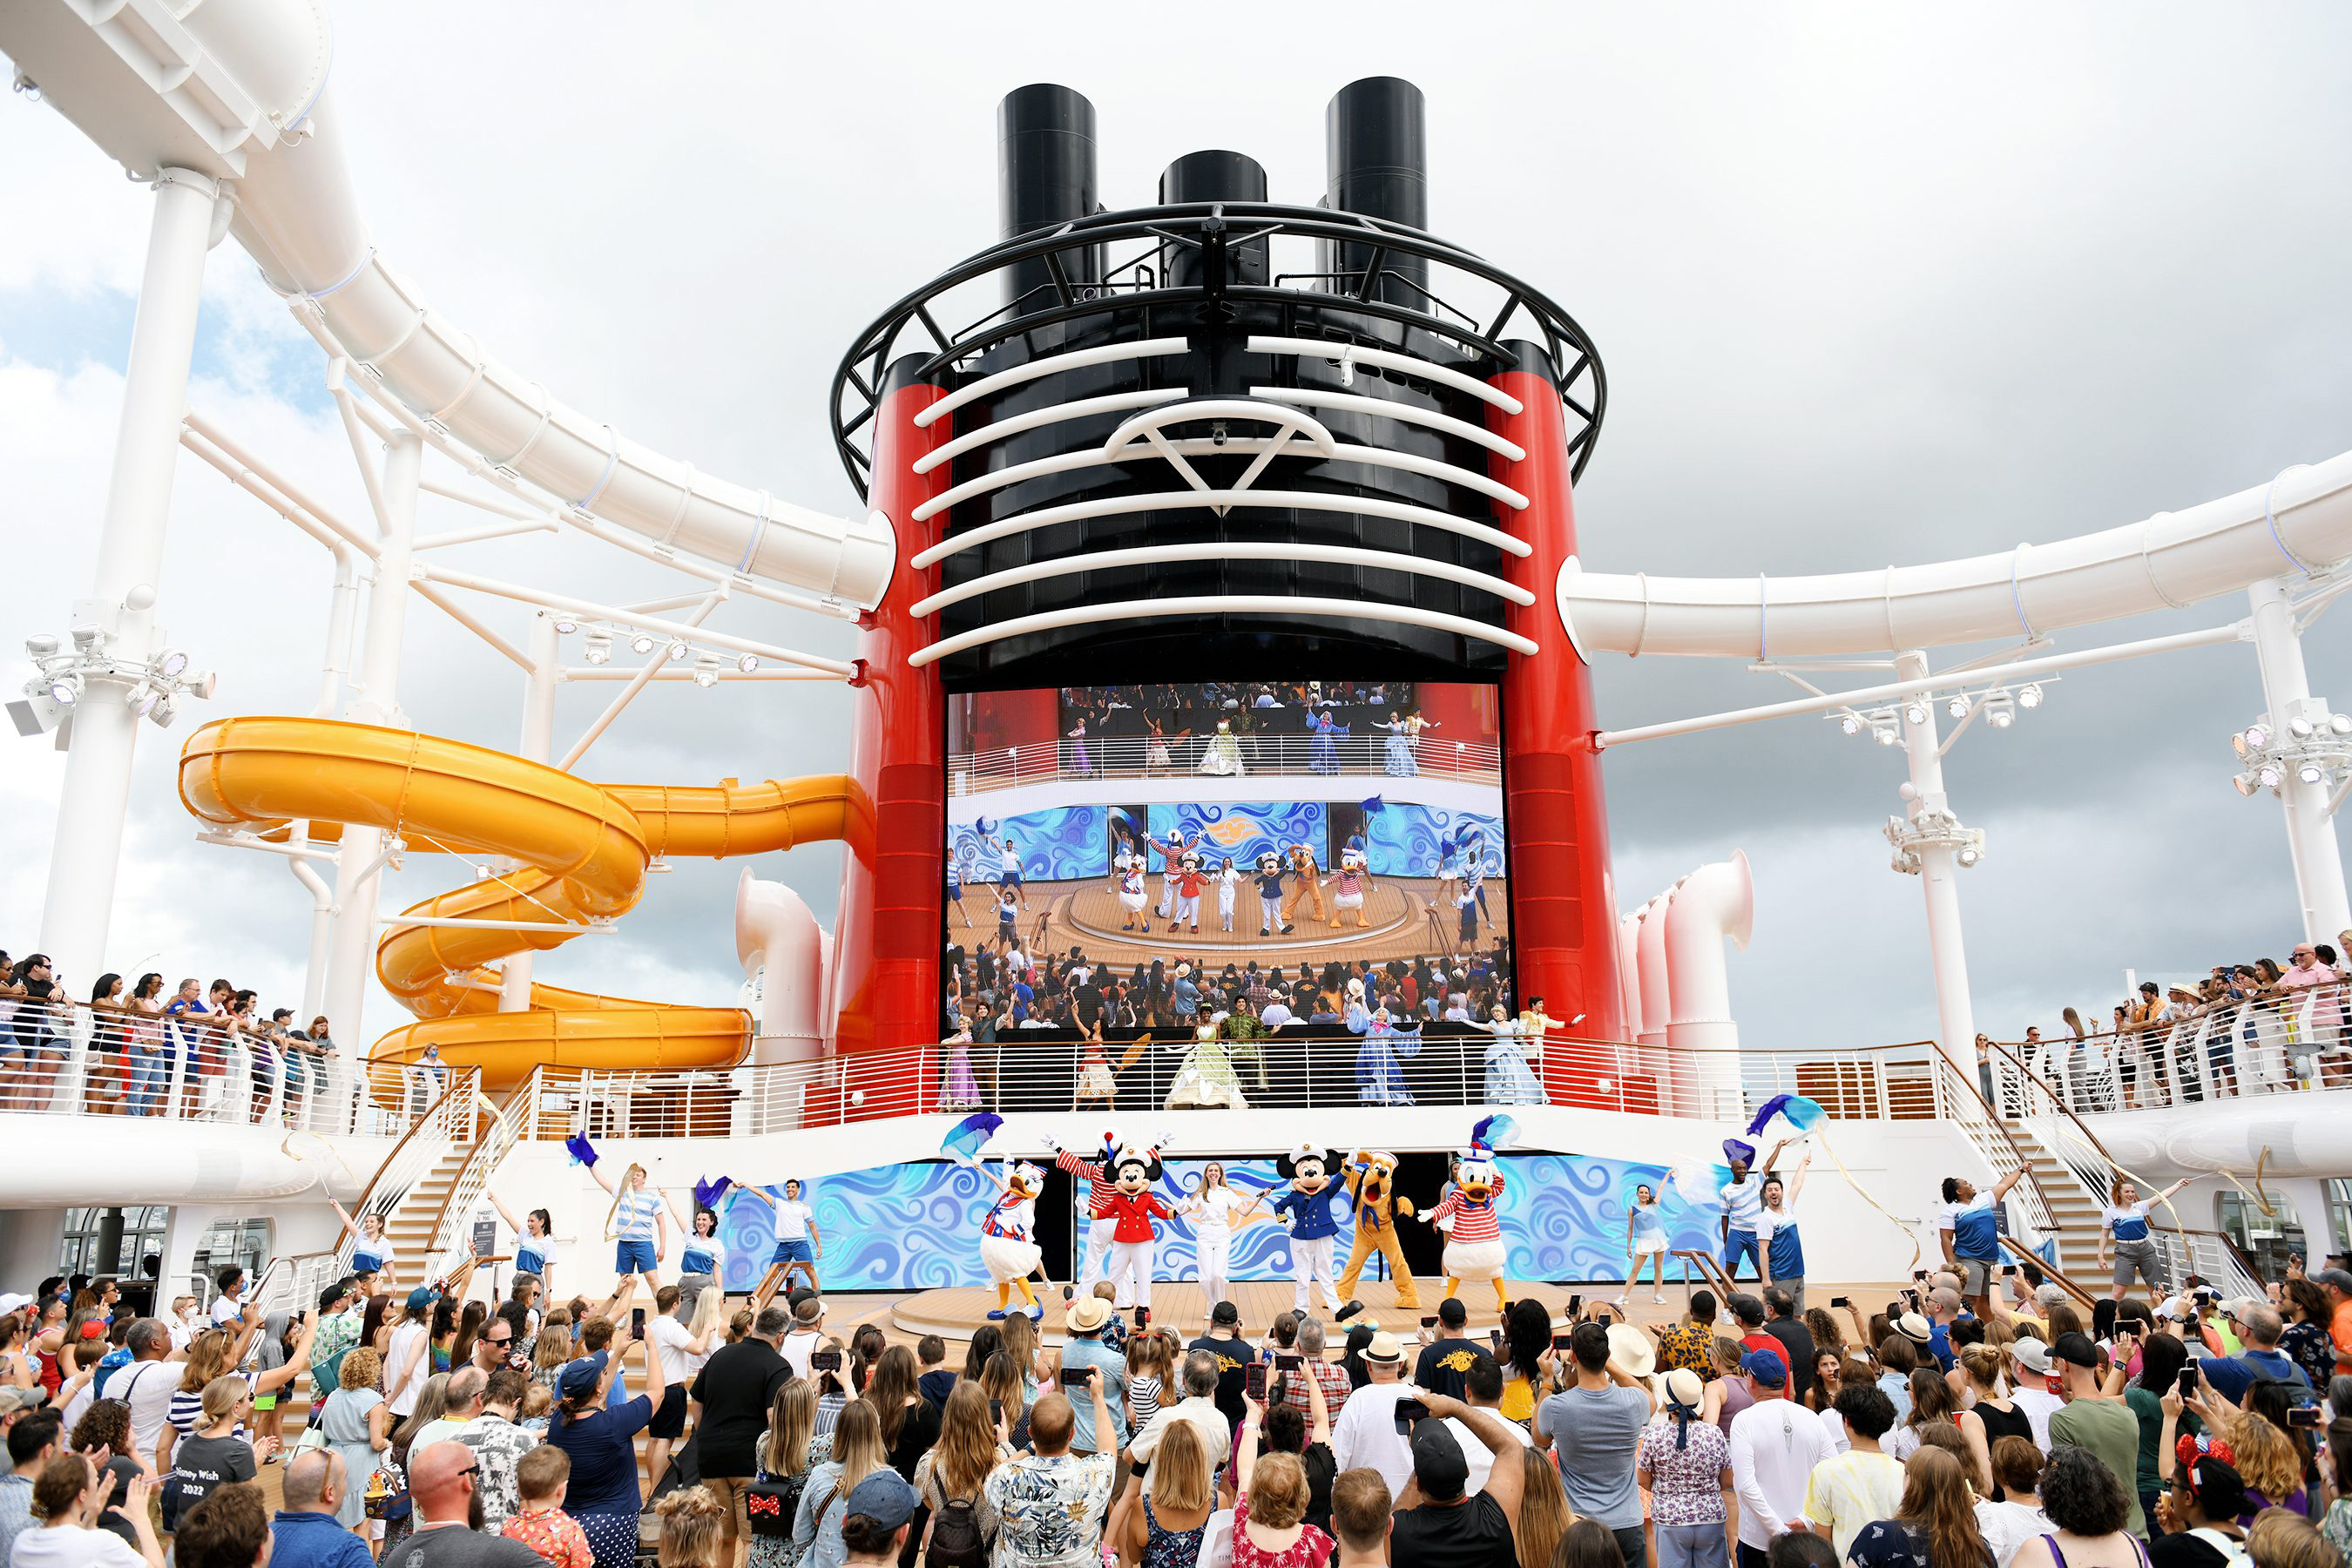 Kids and family enjoying a show at Disney Cruise Lines